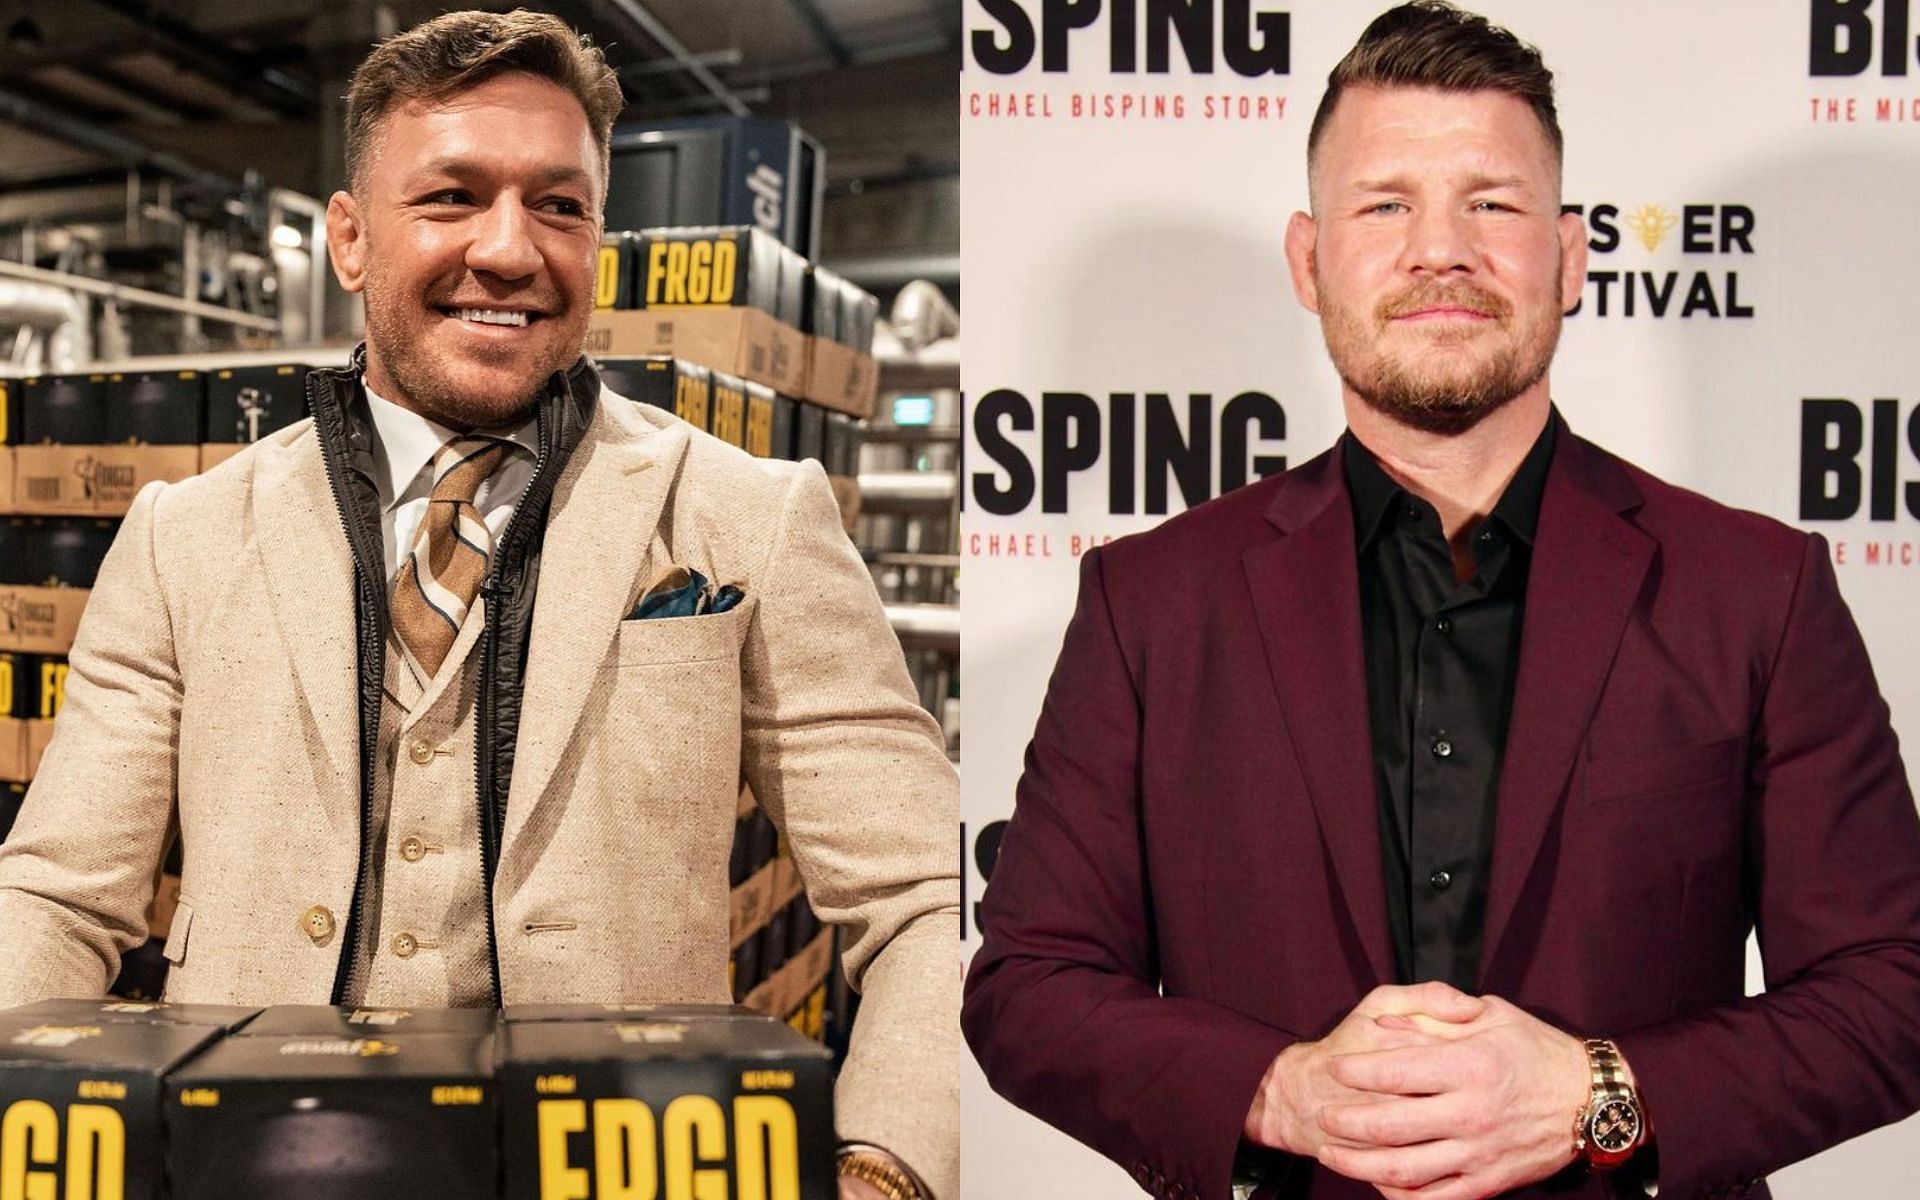 Conor McGregor (Left), Michael Bisping (Right) [Image courtesy: @thenotoriousmma and @mikebisping on Instagram]